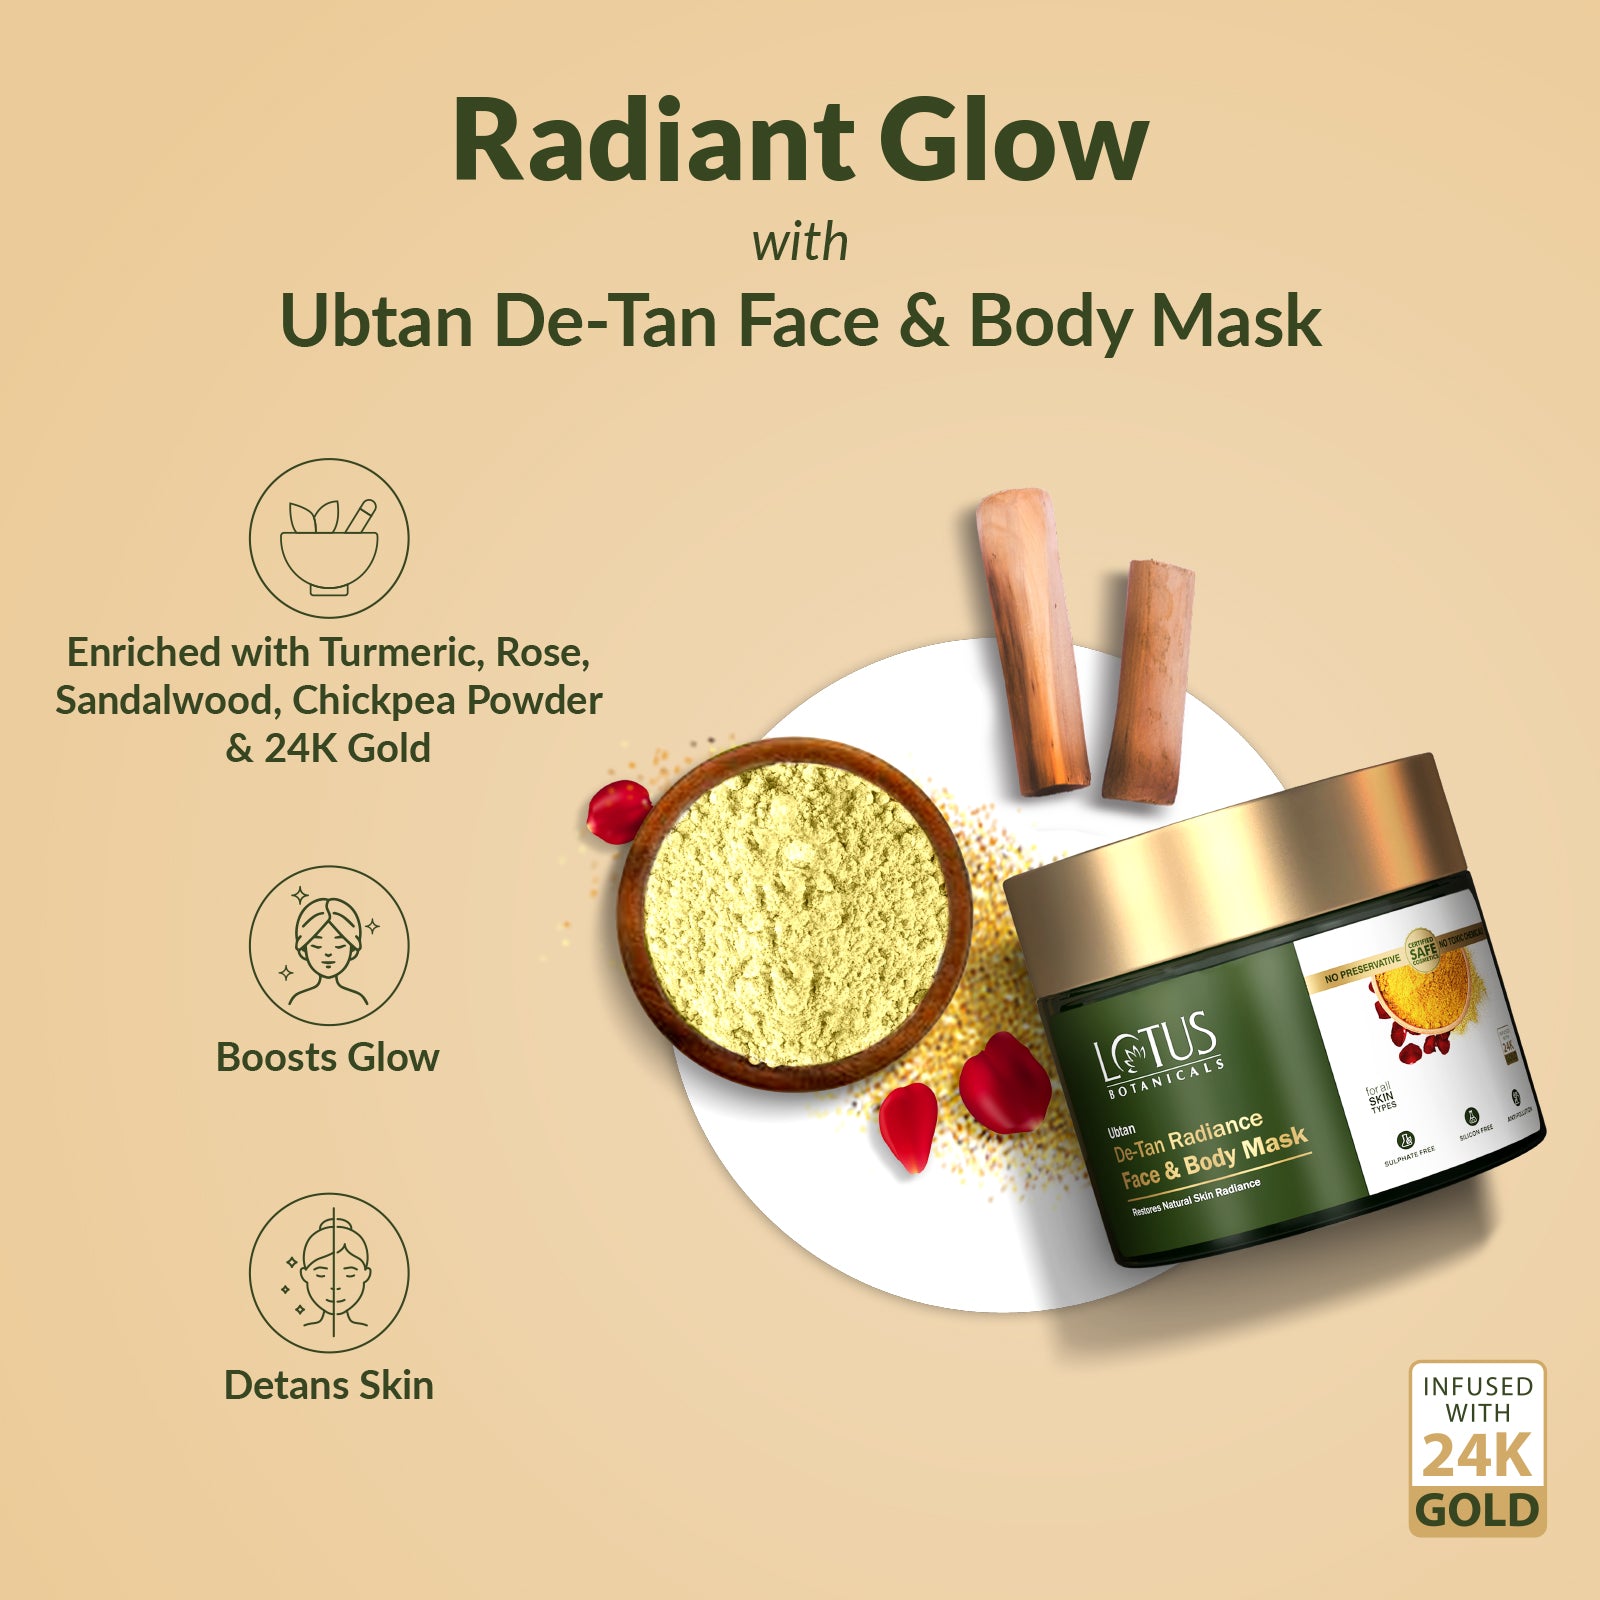 Ubtan De-Tan Radiance Face & Body Mask - Natural Exfoliating and Brightening Formula for a Glowing Complexion